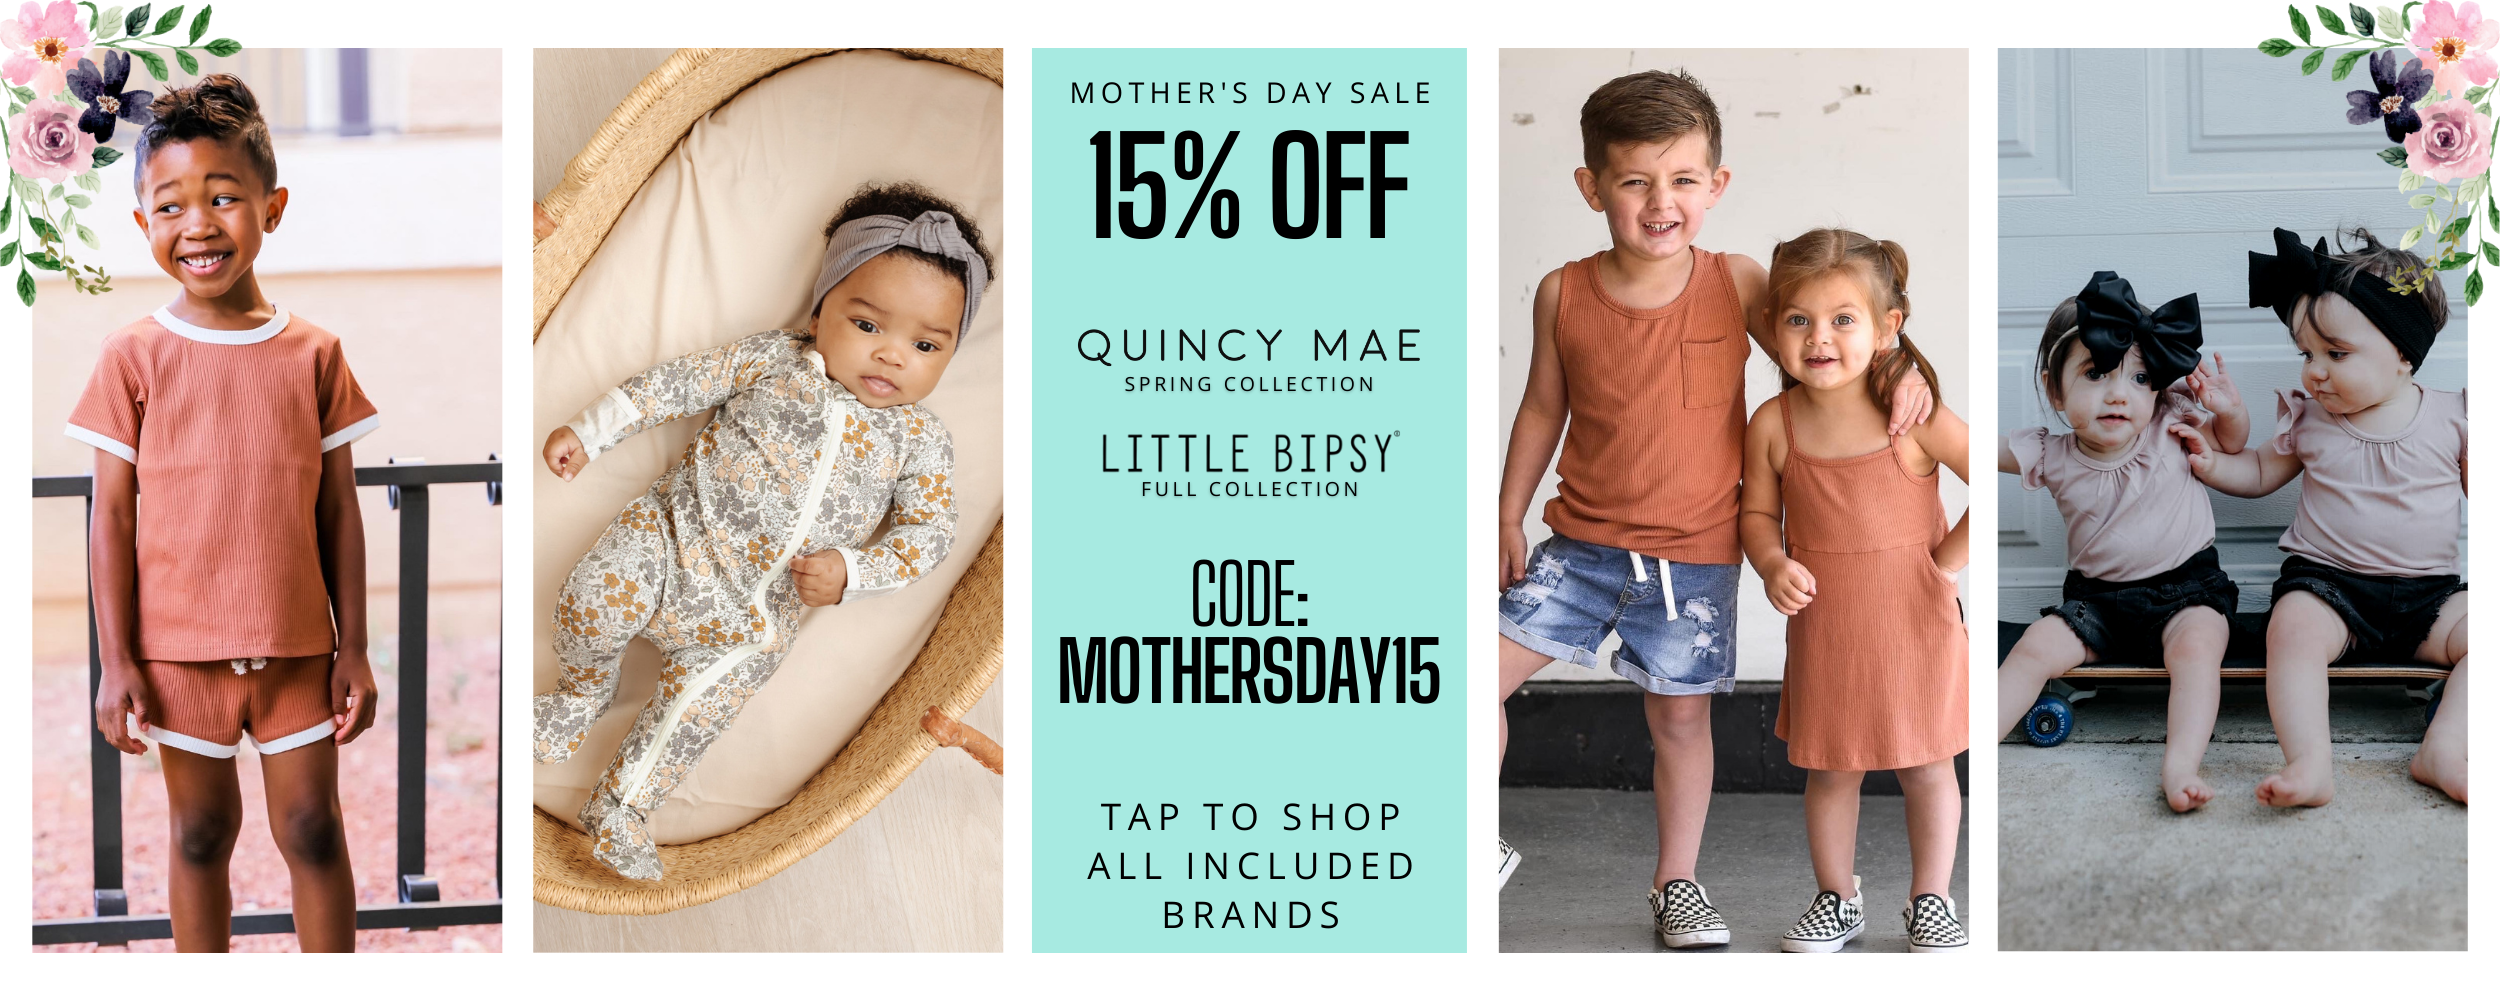 15% off mother's day sale